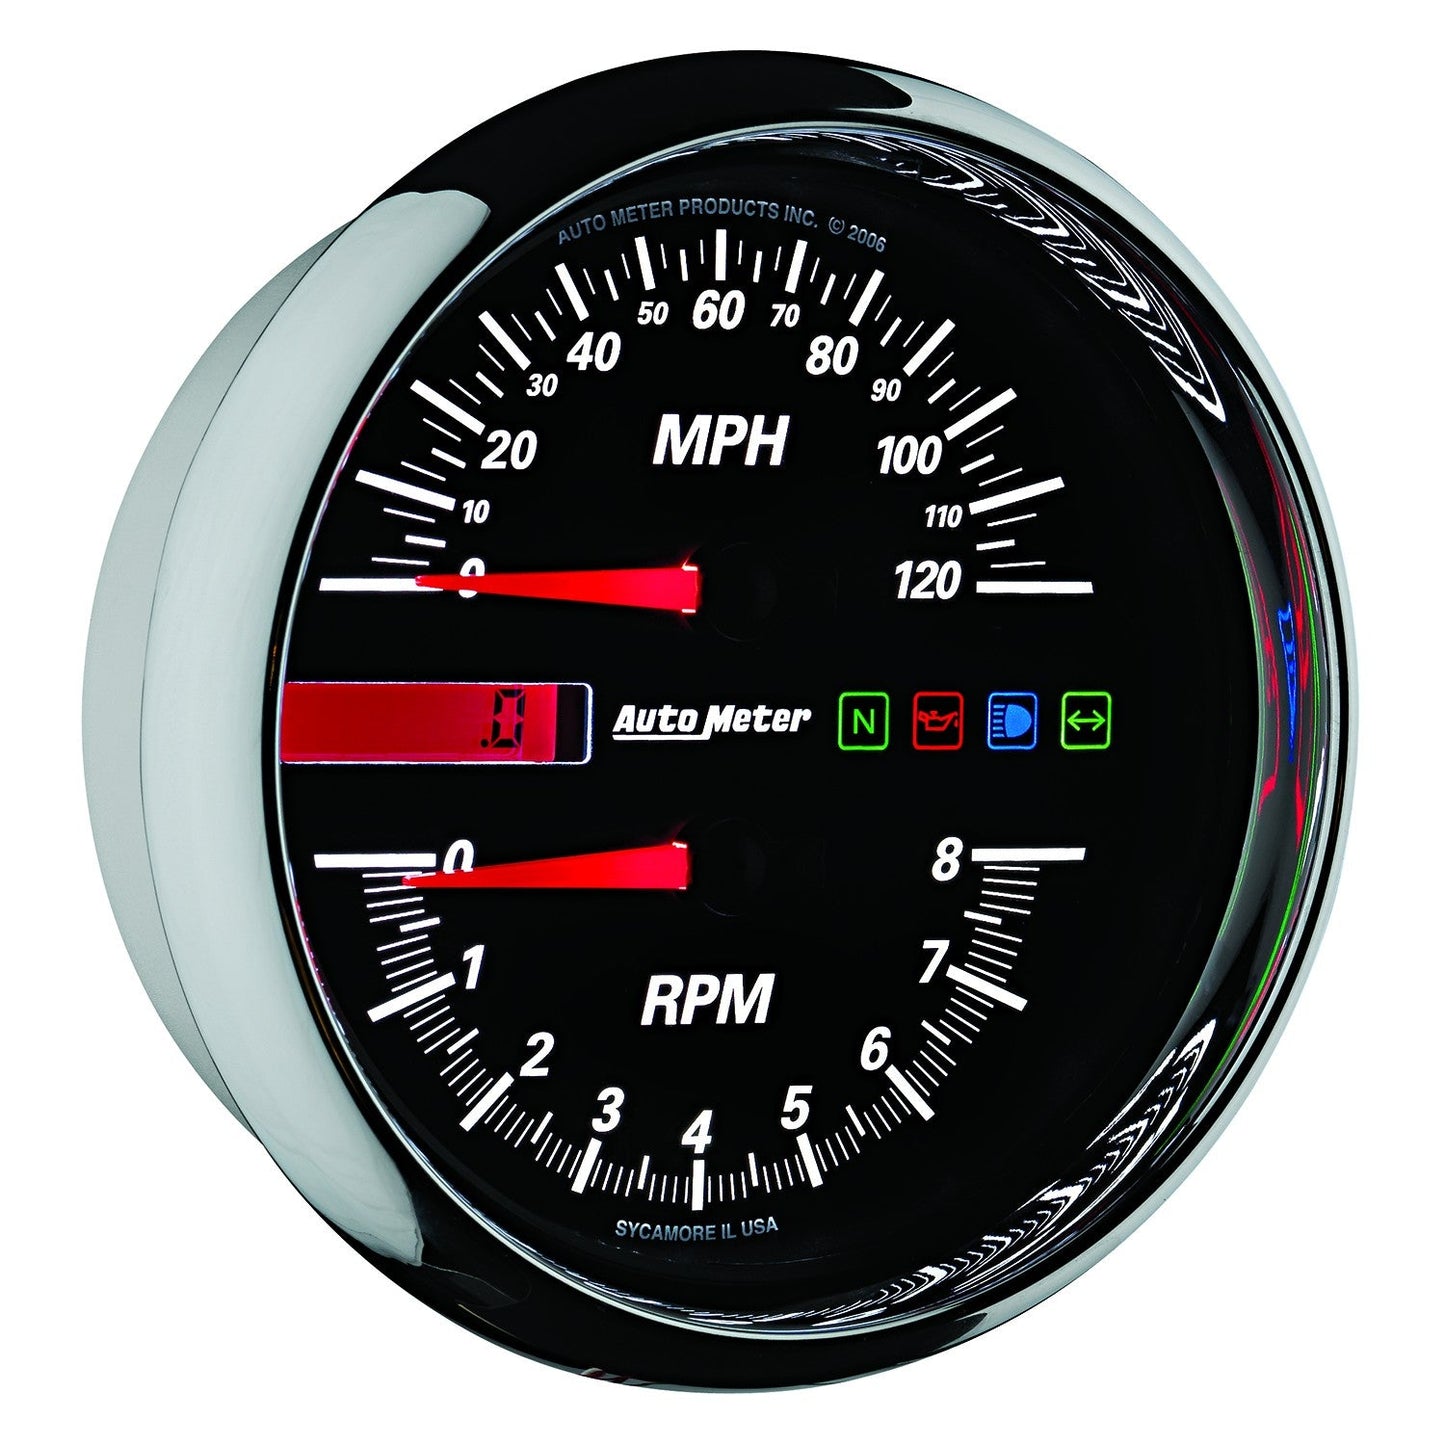 AutoMeter - 5" DIRECT FIT TACHOMETER/SPEEDOMETER COMBO, 8K RPM/120 MPH, ELECTRIC, BLACK, PRO-CYCLE (19466)